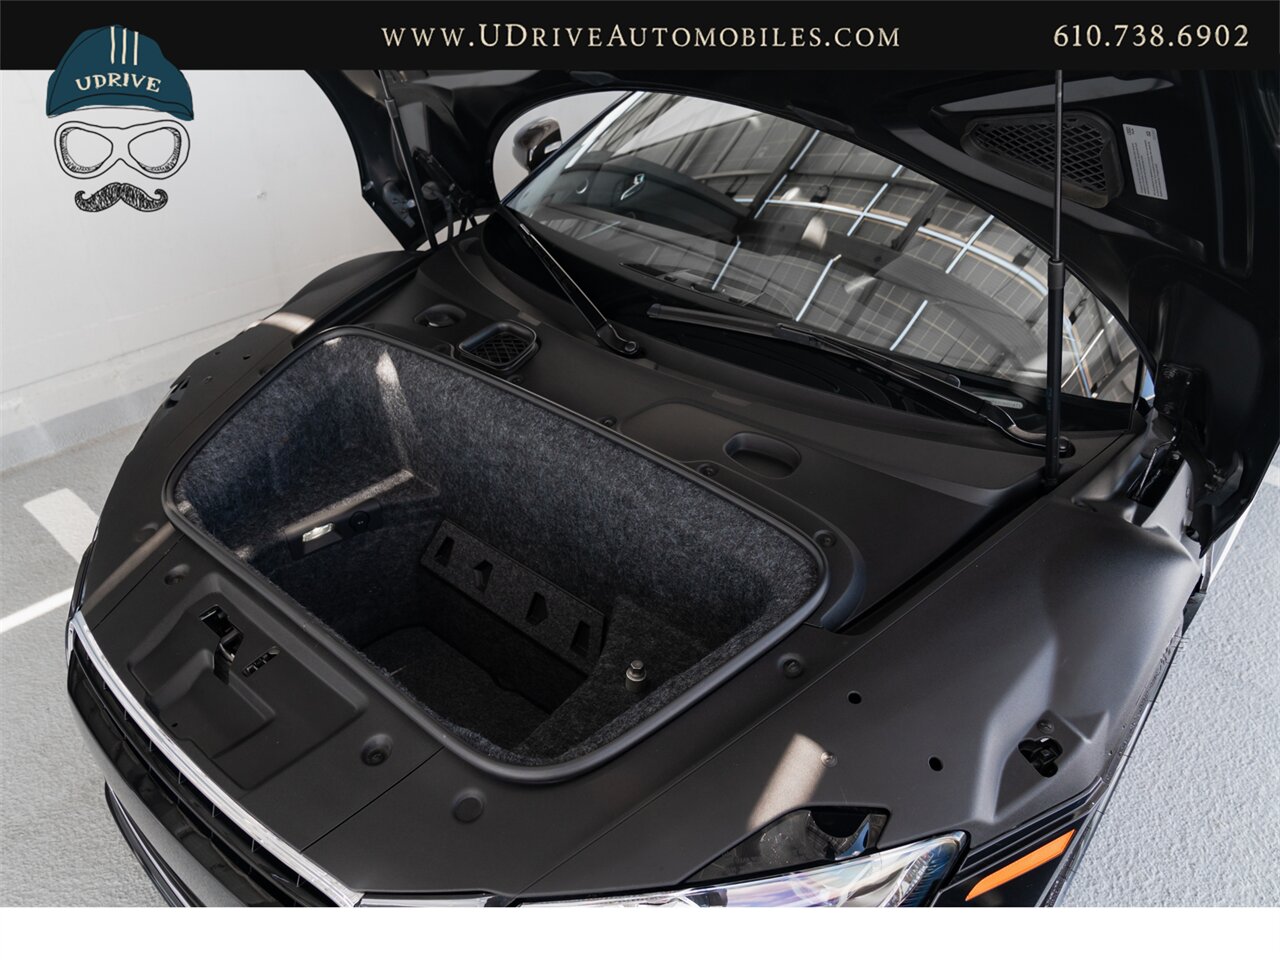 2012 Audi R8 4.2 Quattro  6 Speed Manual 1 Owner Service History - Photo 51 - West Chester, PA 19382